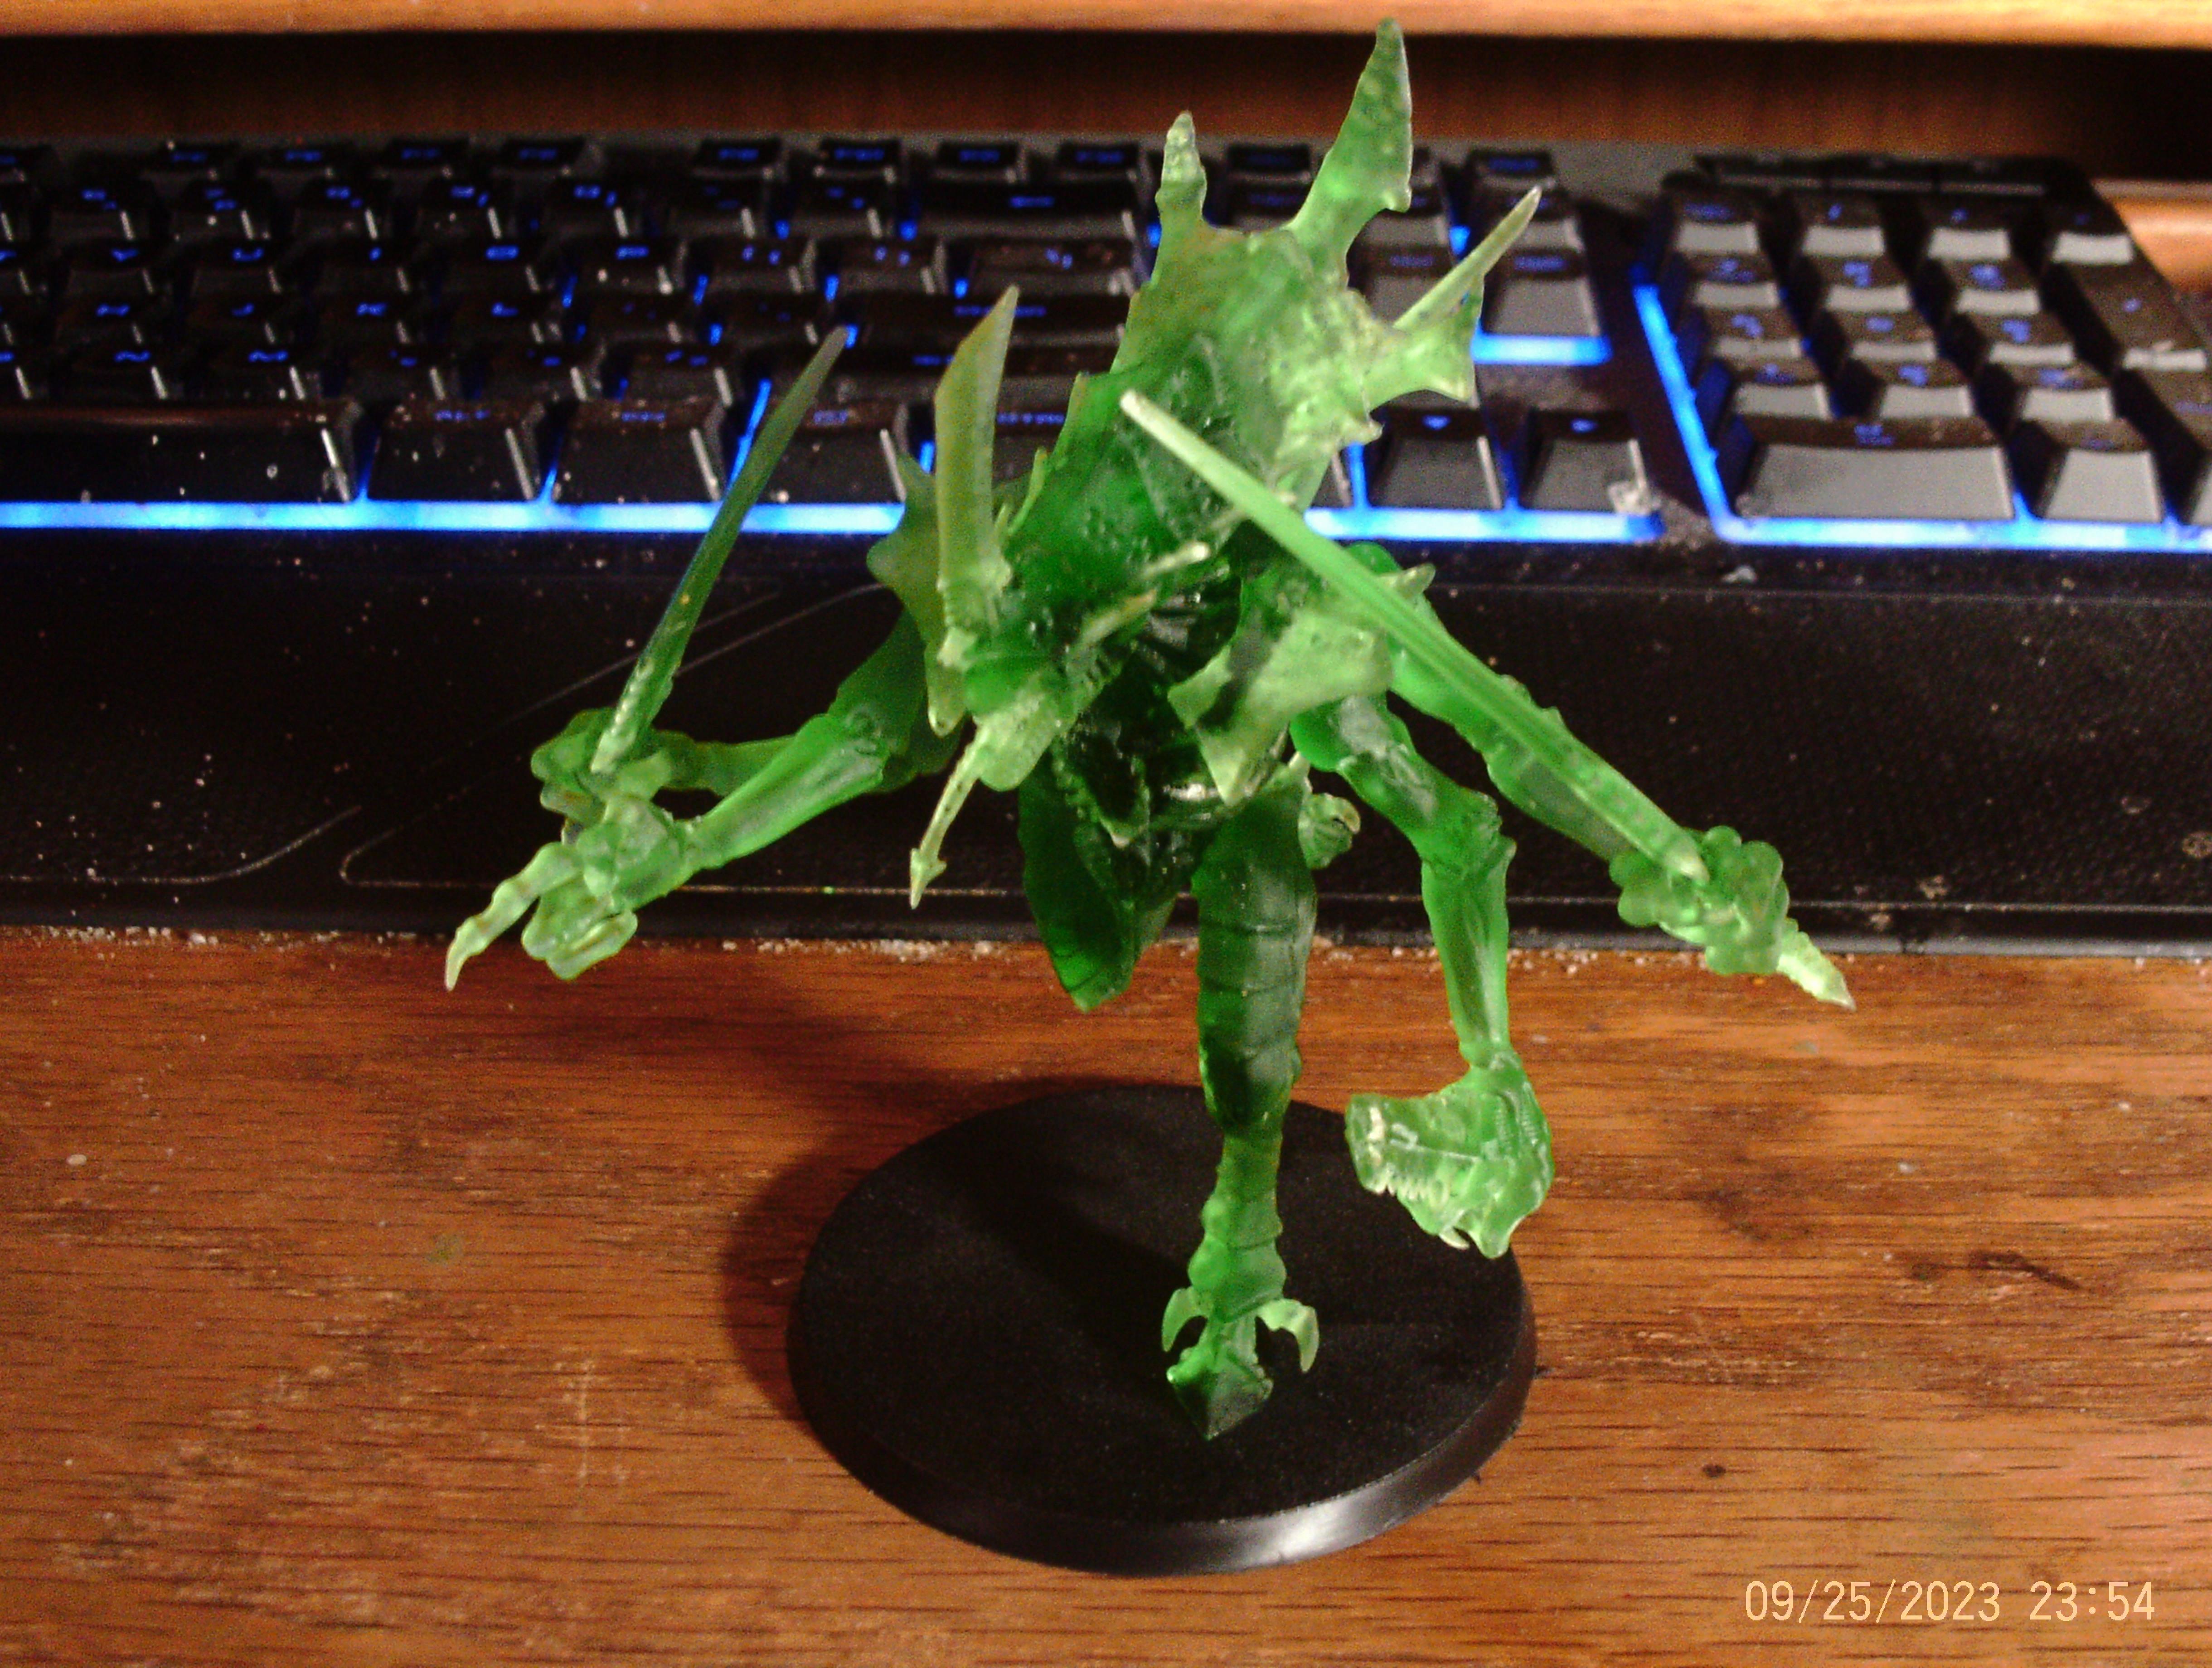 3D Printed Swarmlord assembled